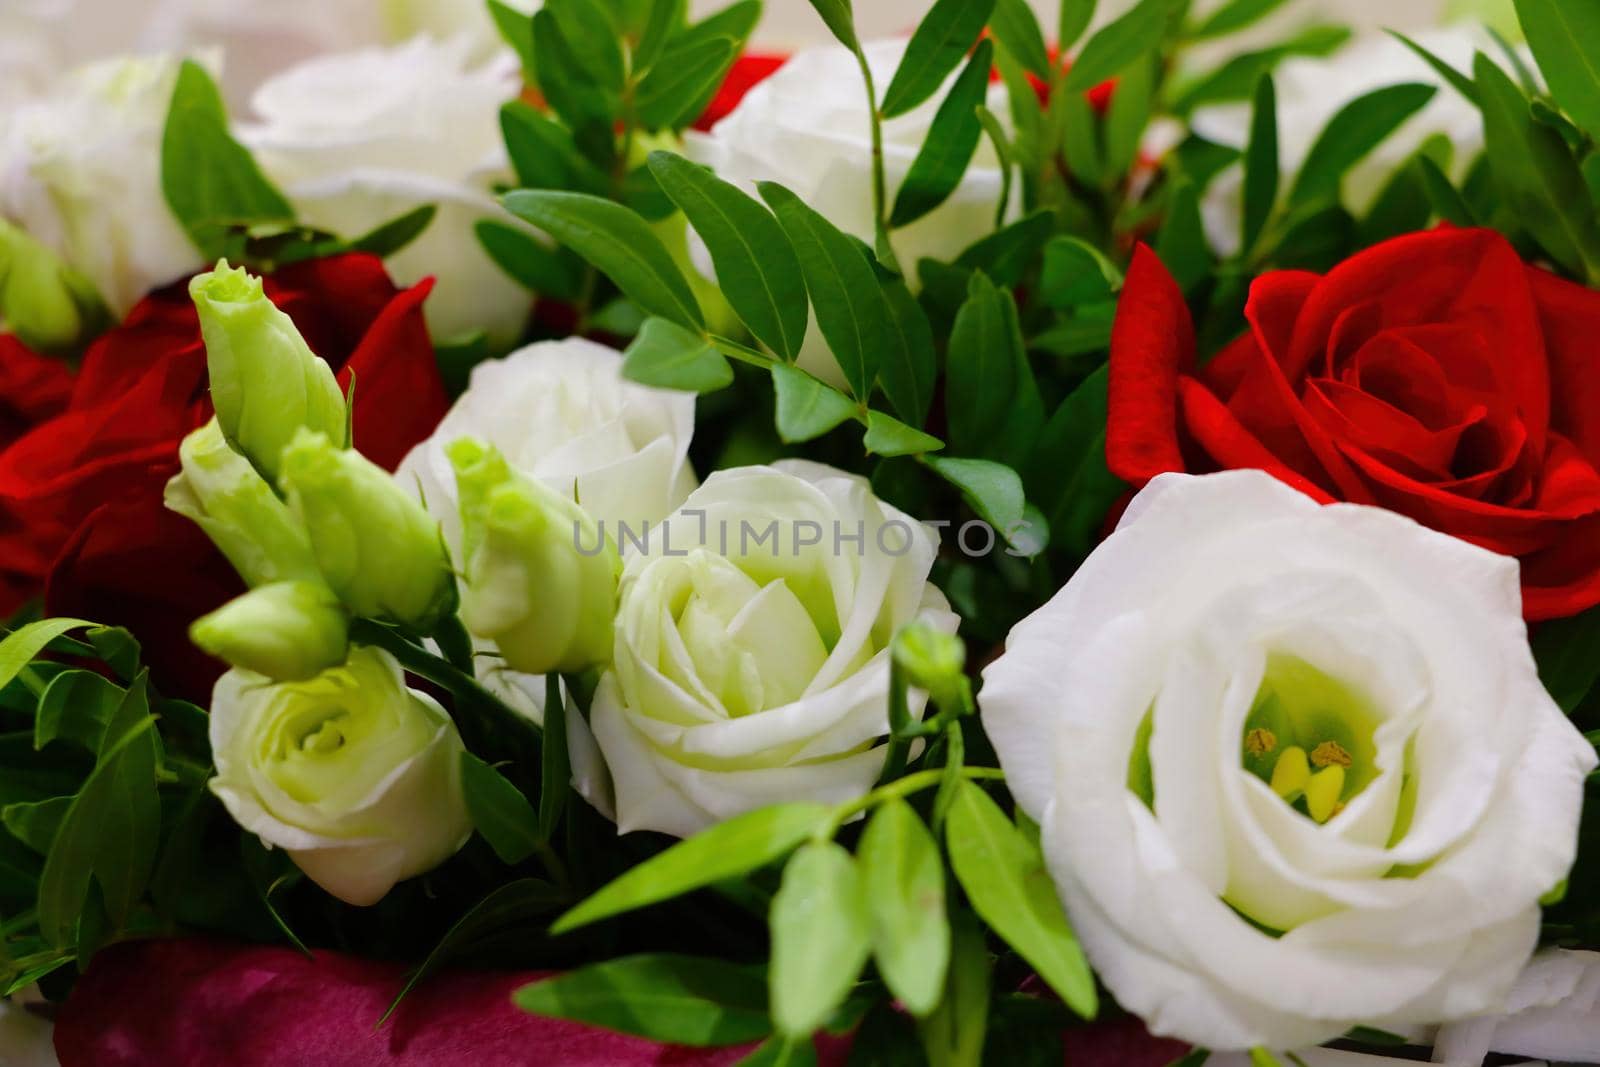 Top view of a bouquet of red white roses